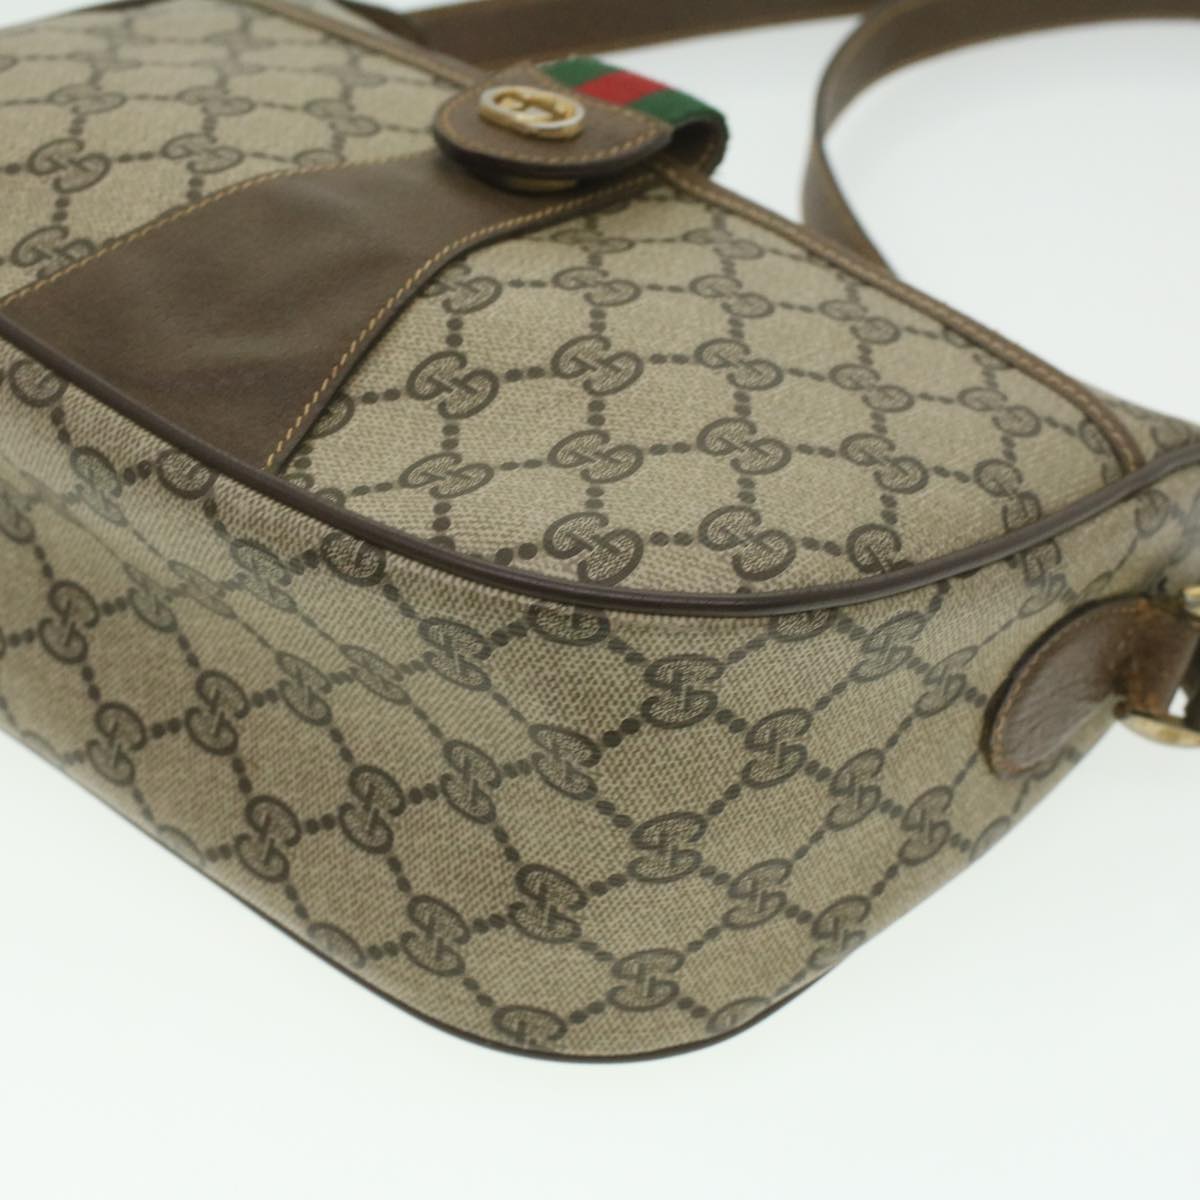 GUCCI GG Canvas Web Sherry Line Shoulder Bag Beige Red Green 8902032 Auth 37565